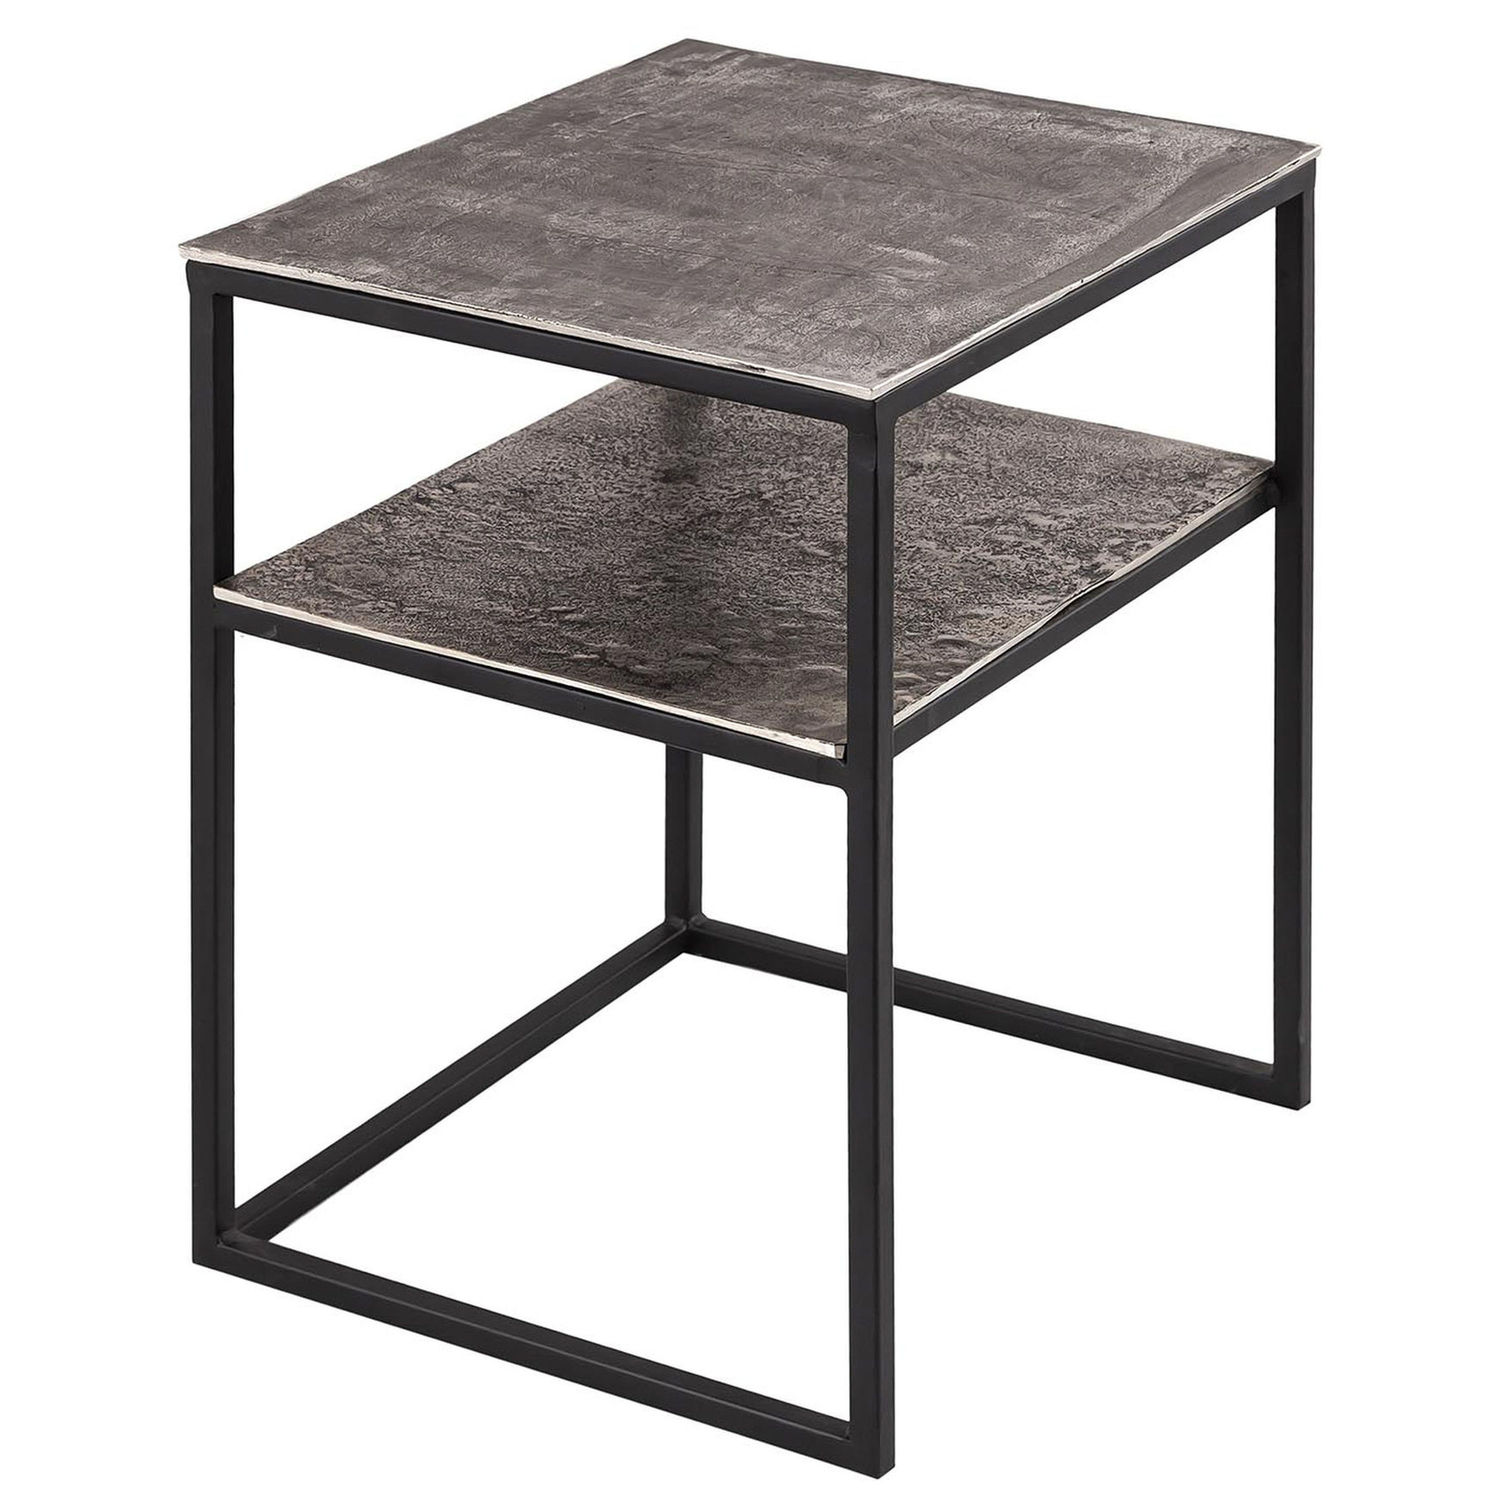 Cast silver Side Table with Shelf